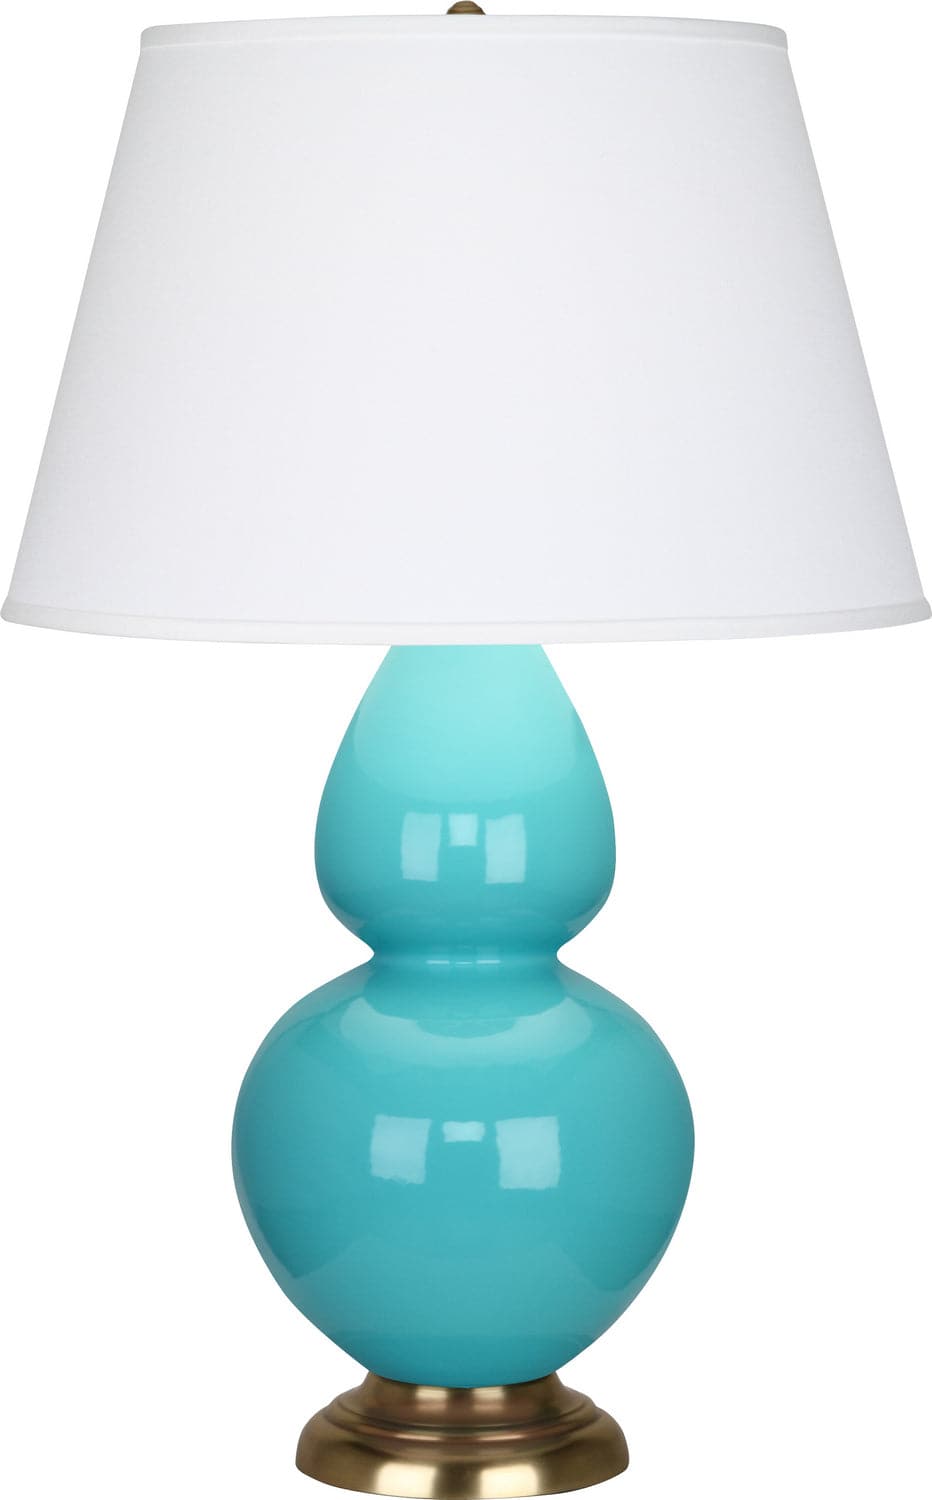 Robert Abbey - 1740X - One Light Table Lamp - Double Gourd - Egg Blue Glazed w/Antique Natural Brass